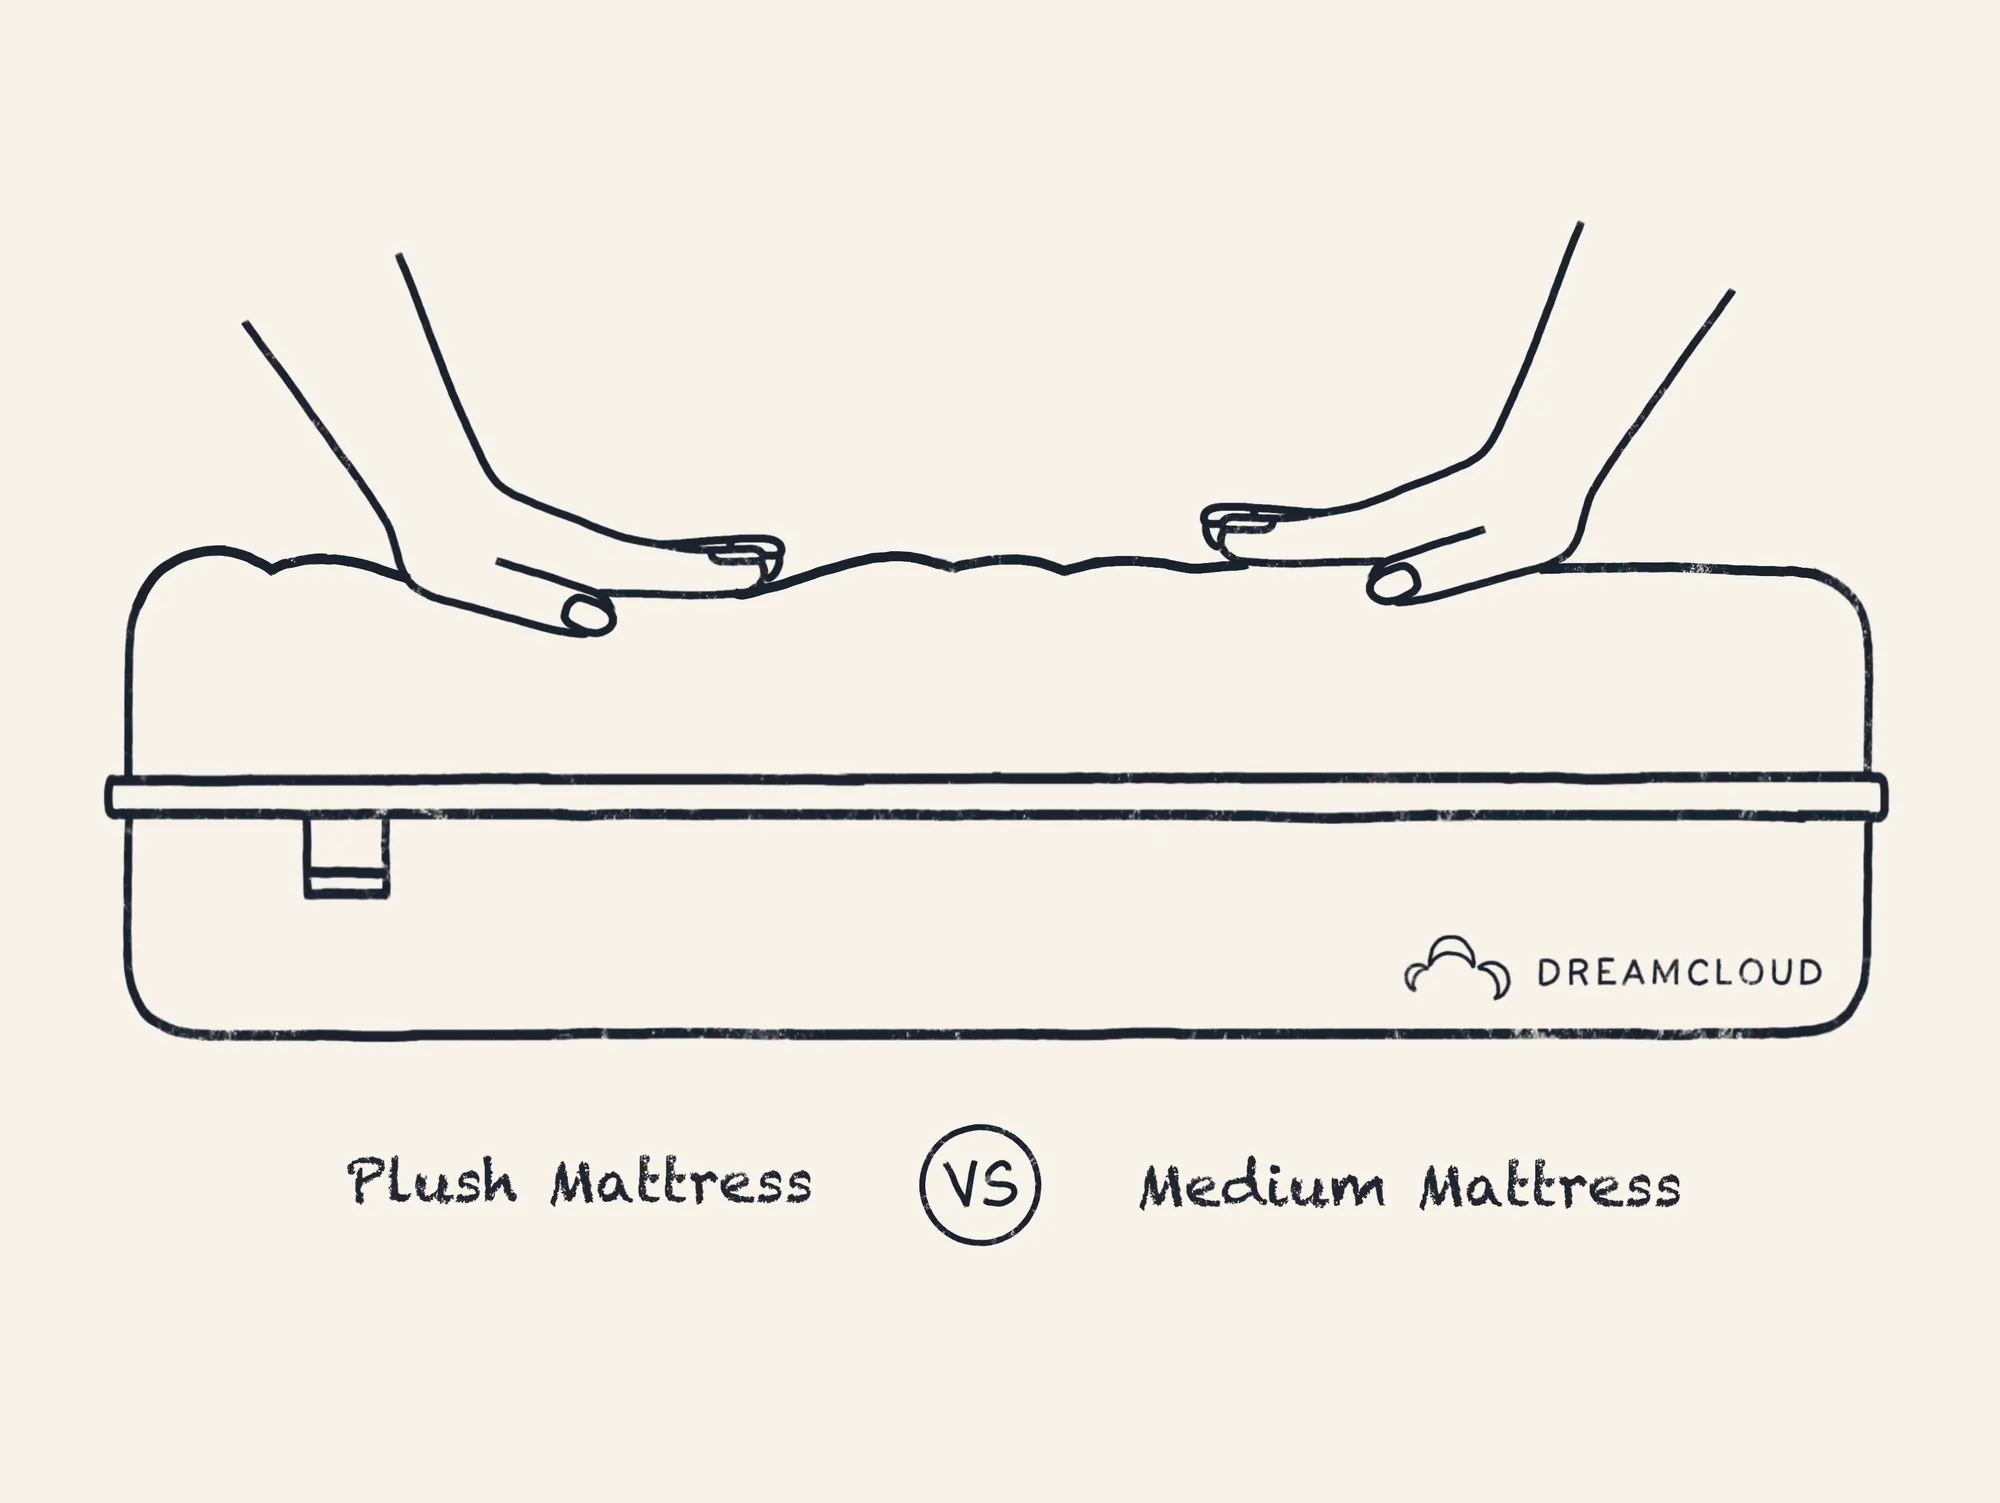 What Does Plush Mean For A Mattress?